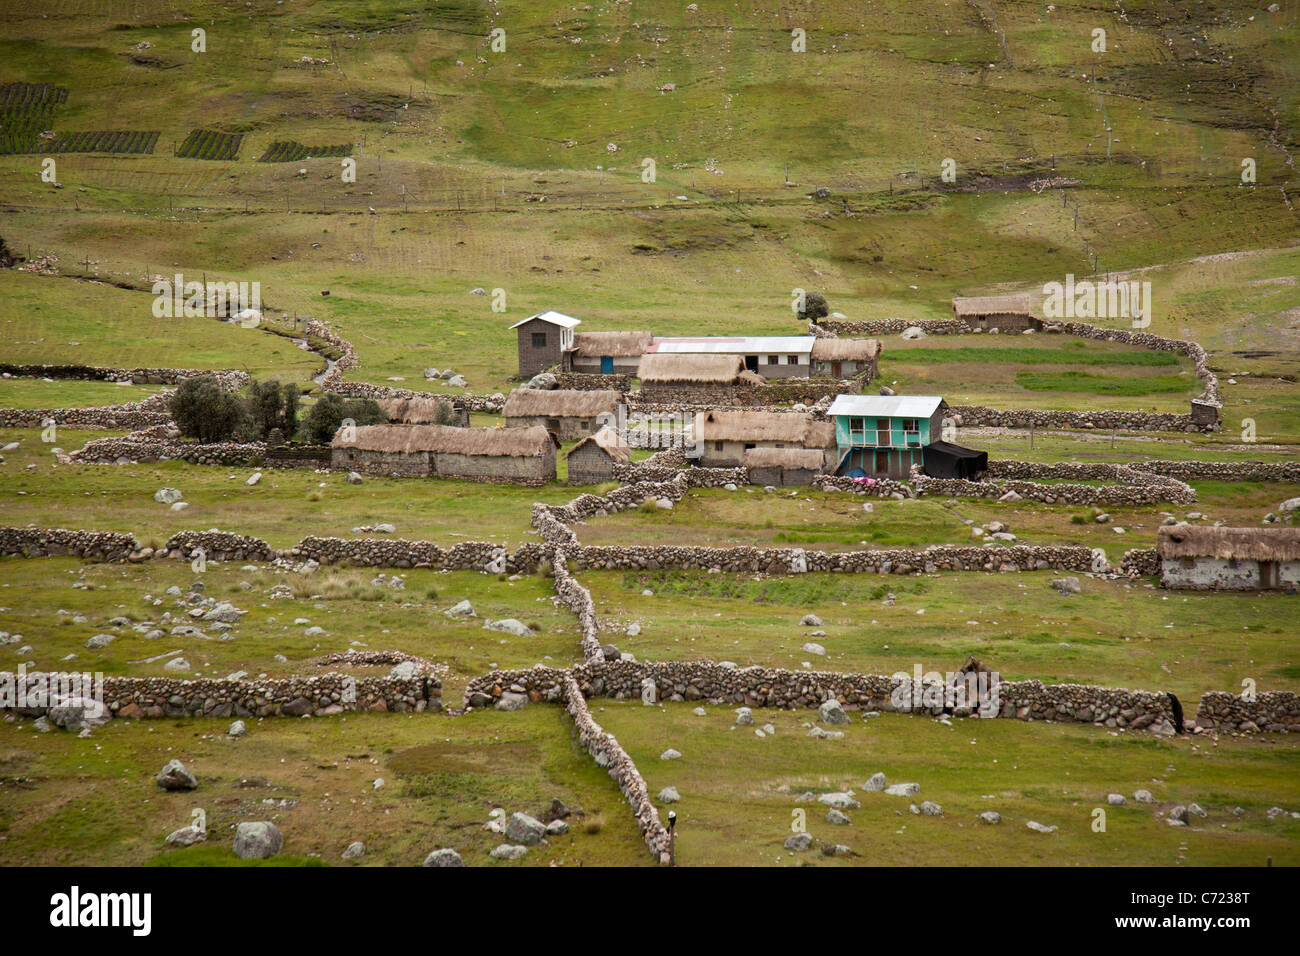 Rural home in the Andes Mountains, Peru Stock Photo